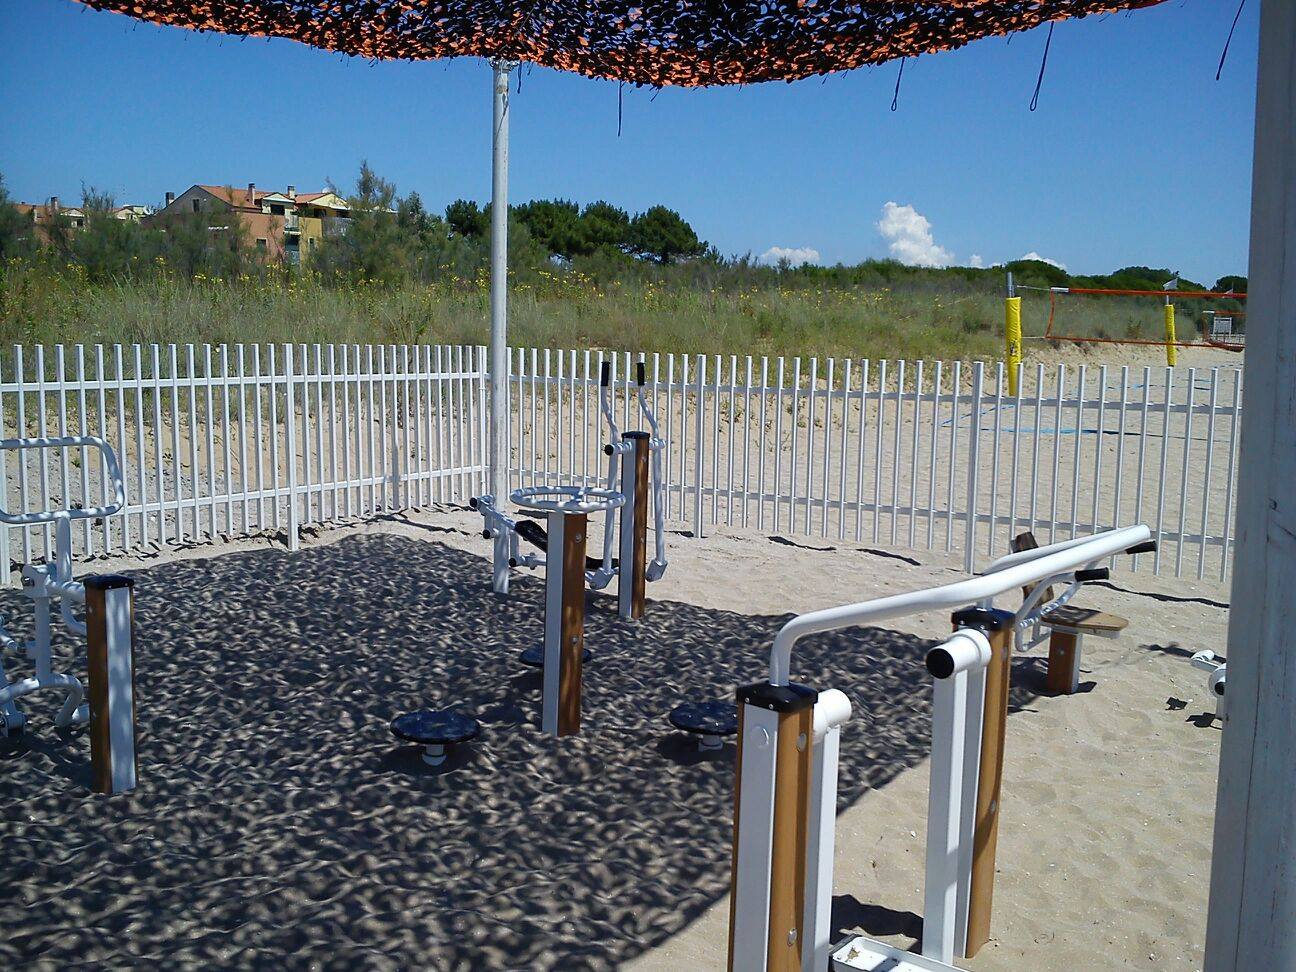 Who is park fitness equipment suitable for?